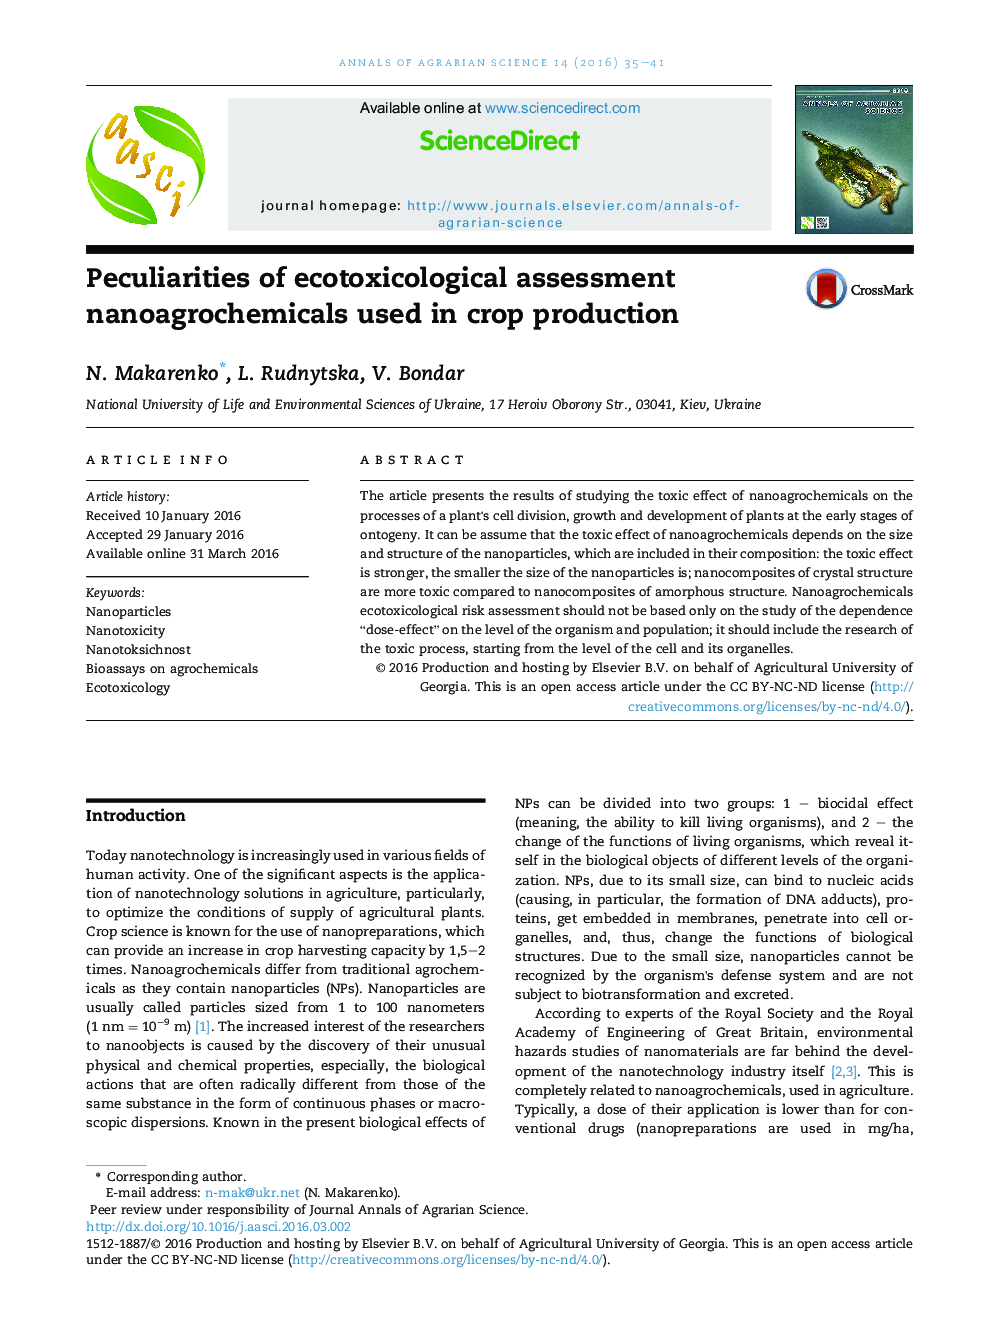 Peculiarities of ecotoxicological assessment nanoagrochemicals used in crop production 